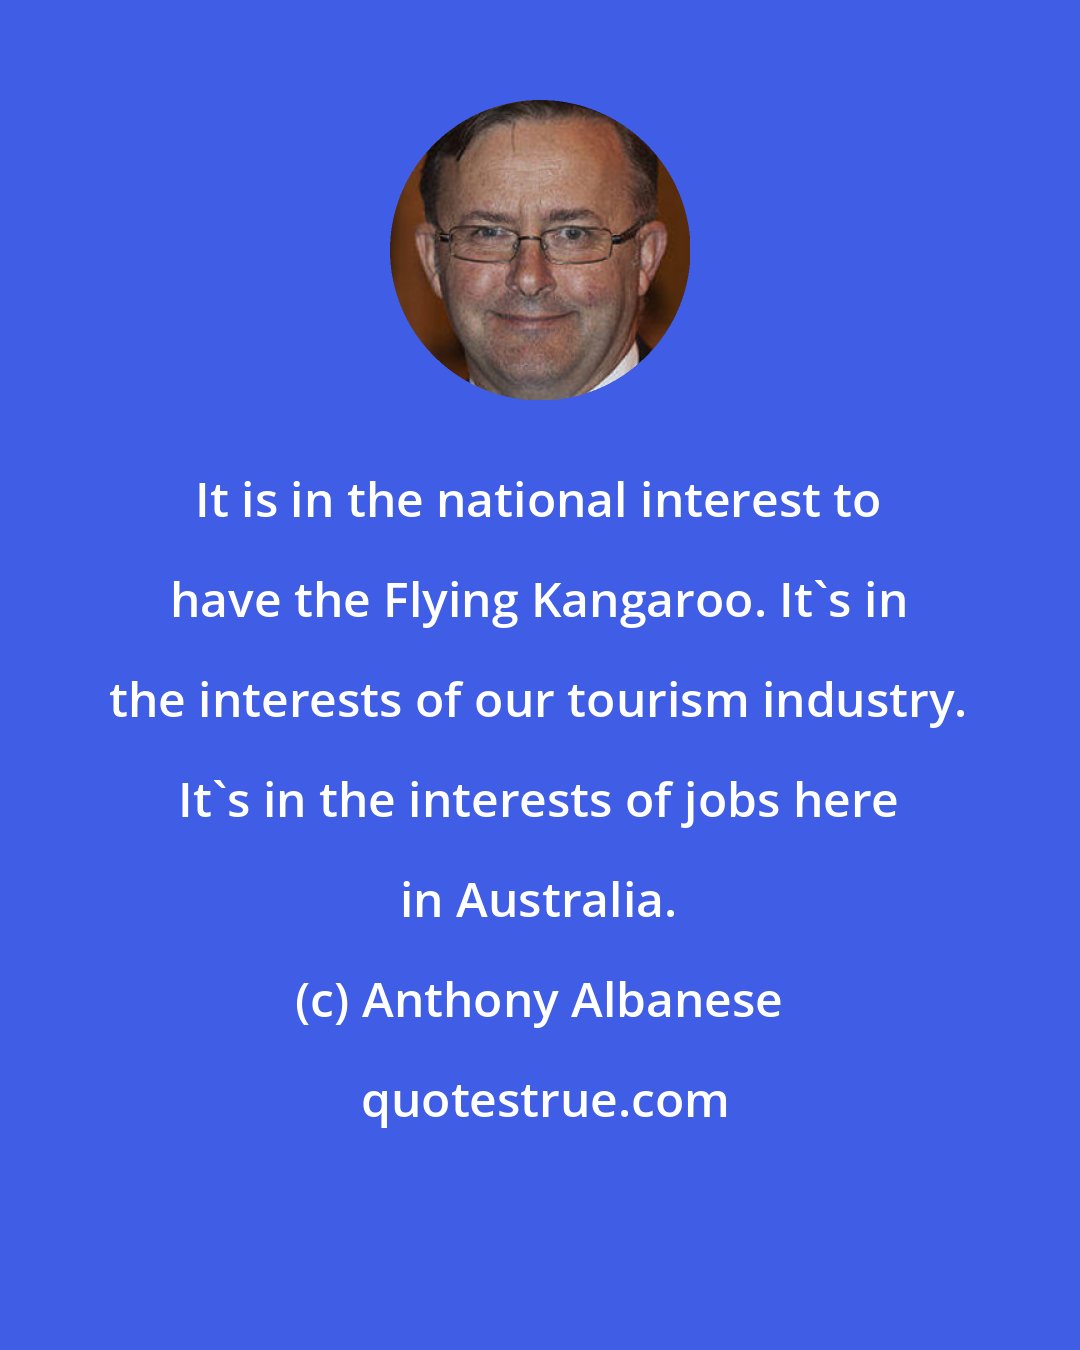 Anthony Albanese: It is in the national interest to have the Flying Kangaroo. It's in the interests of our tourism industry. It's in the interests of jobs here in Australia.